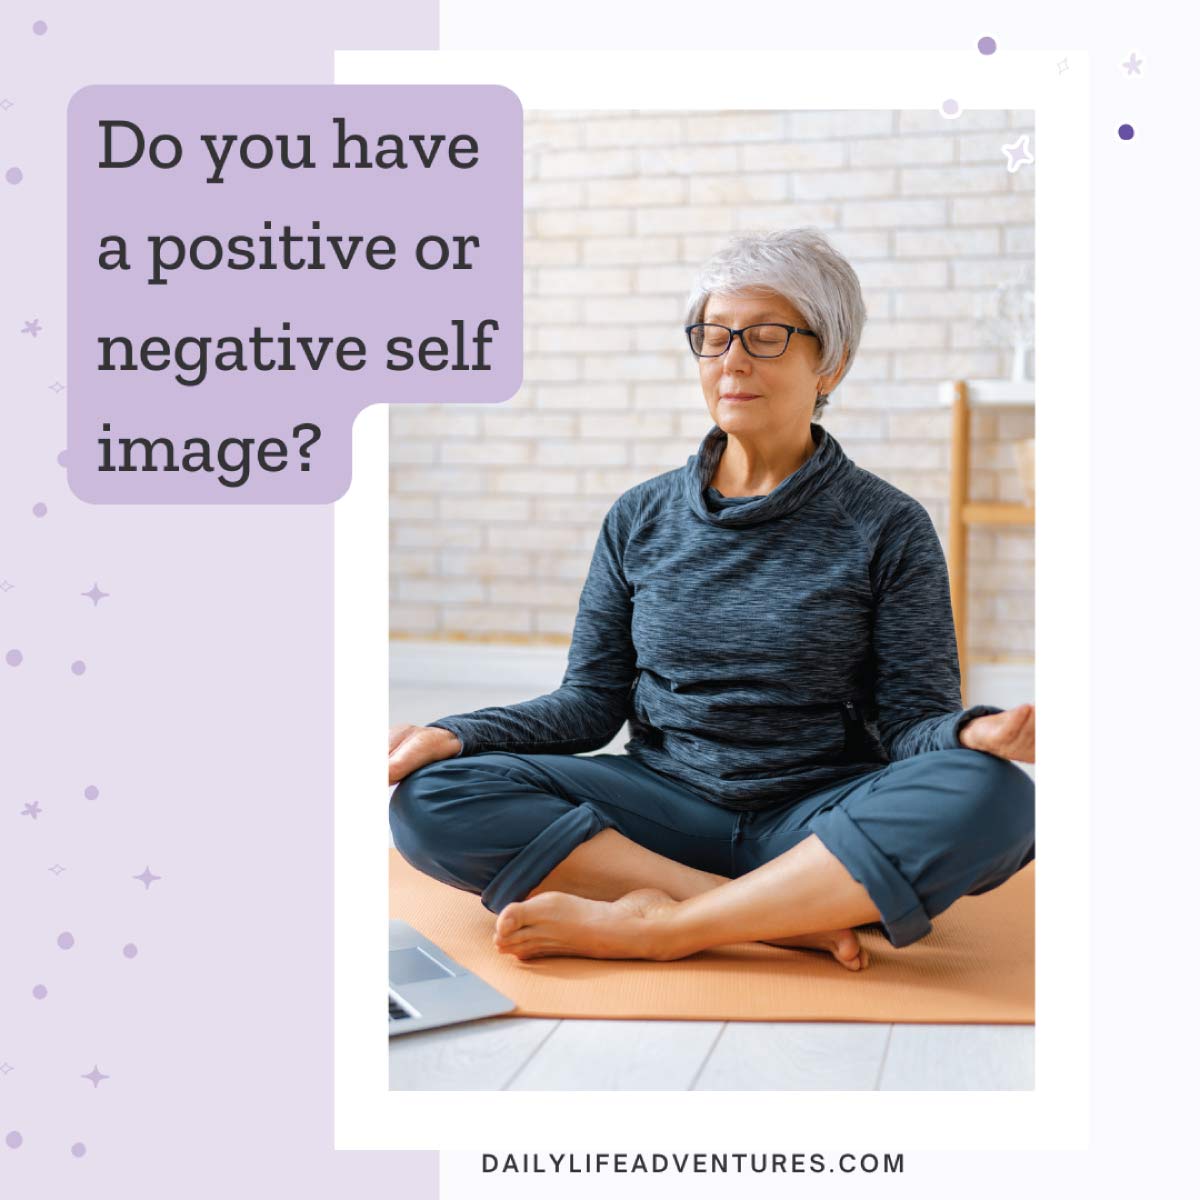 The Benefits of a Positive Self Image